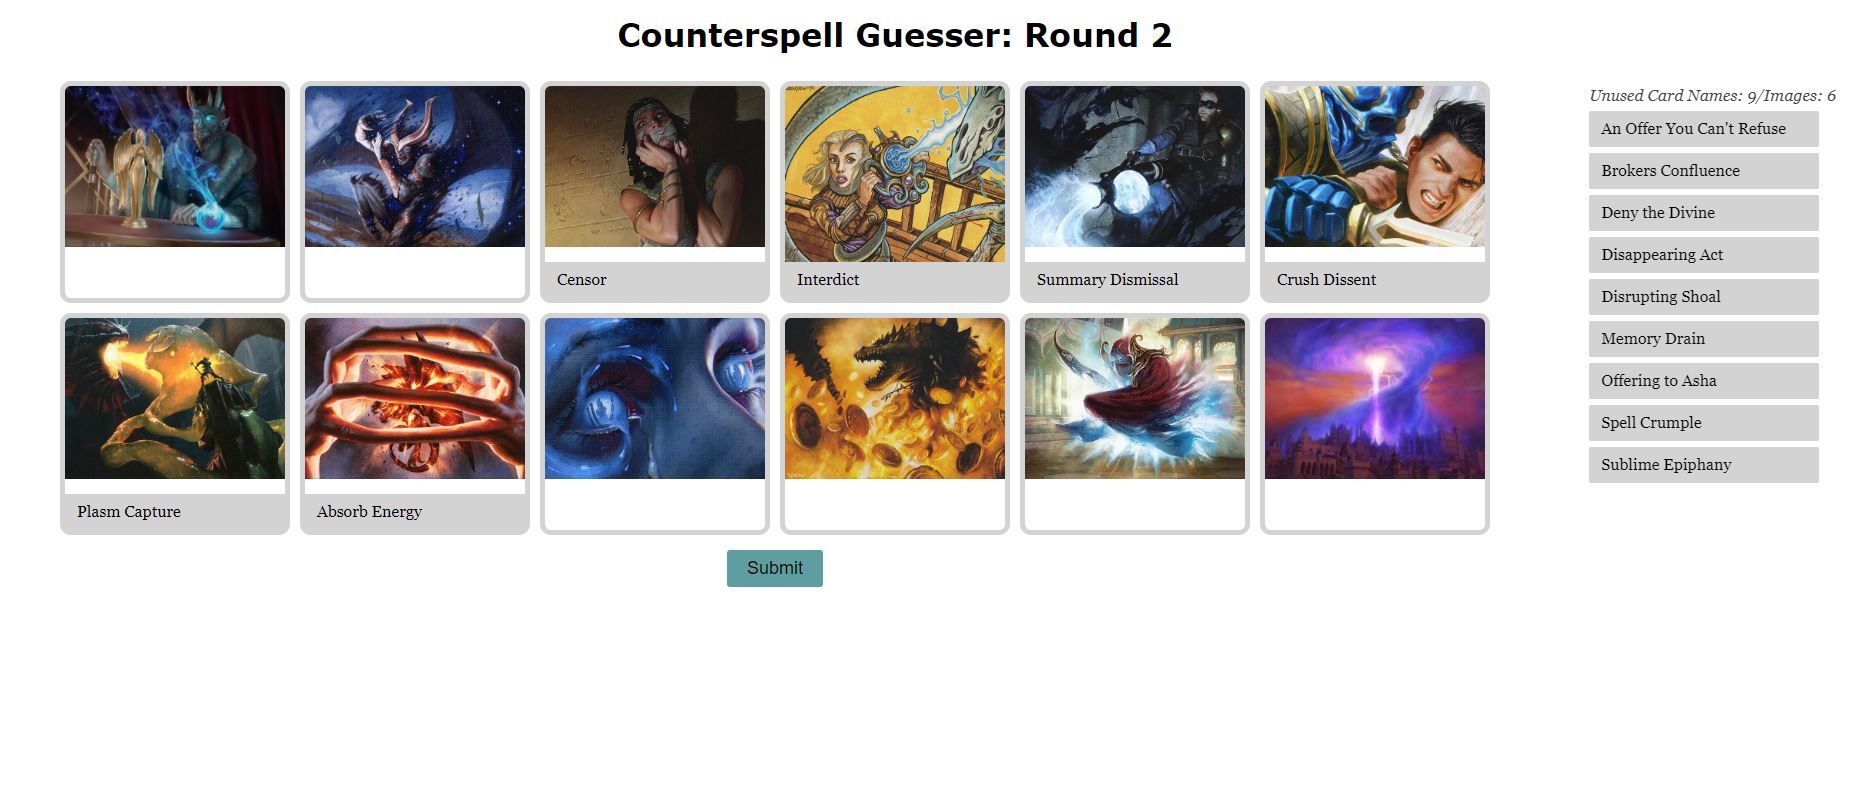 Counterspell Guesser